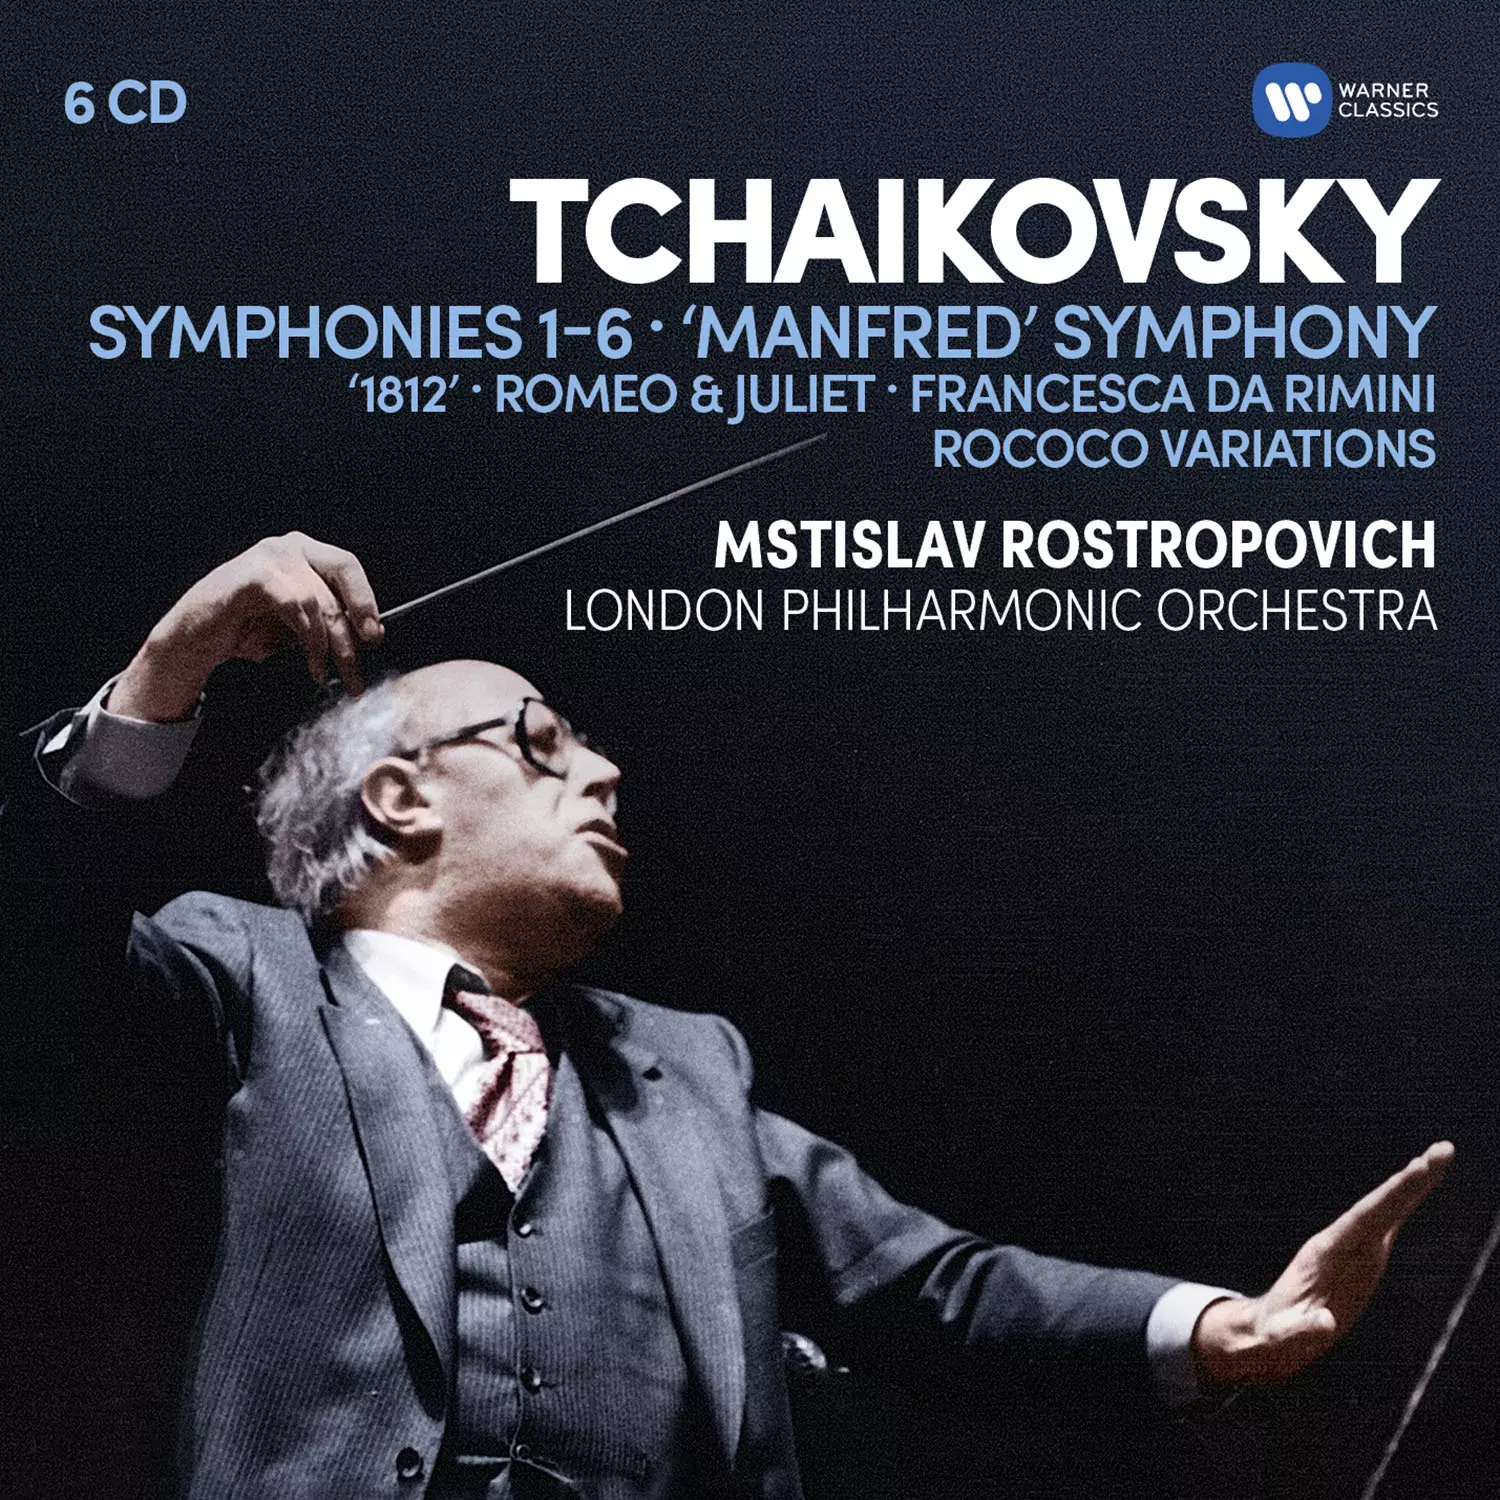 Tchaikovsky: Symphonies 1-6, Manfred Symphony, Overtures, Rococo variations